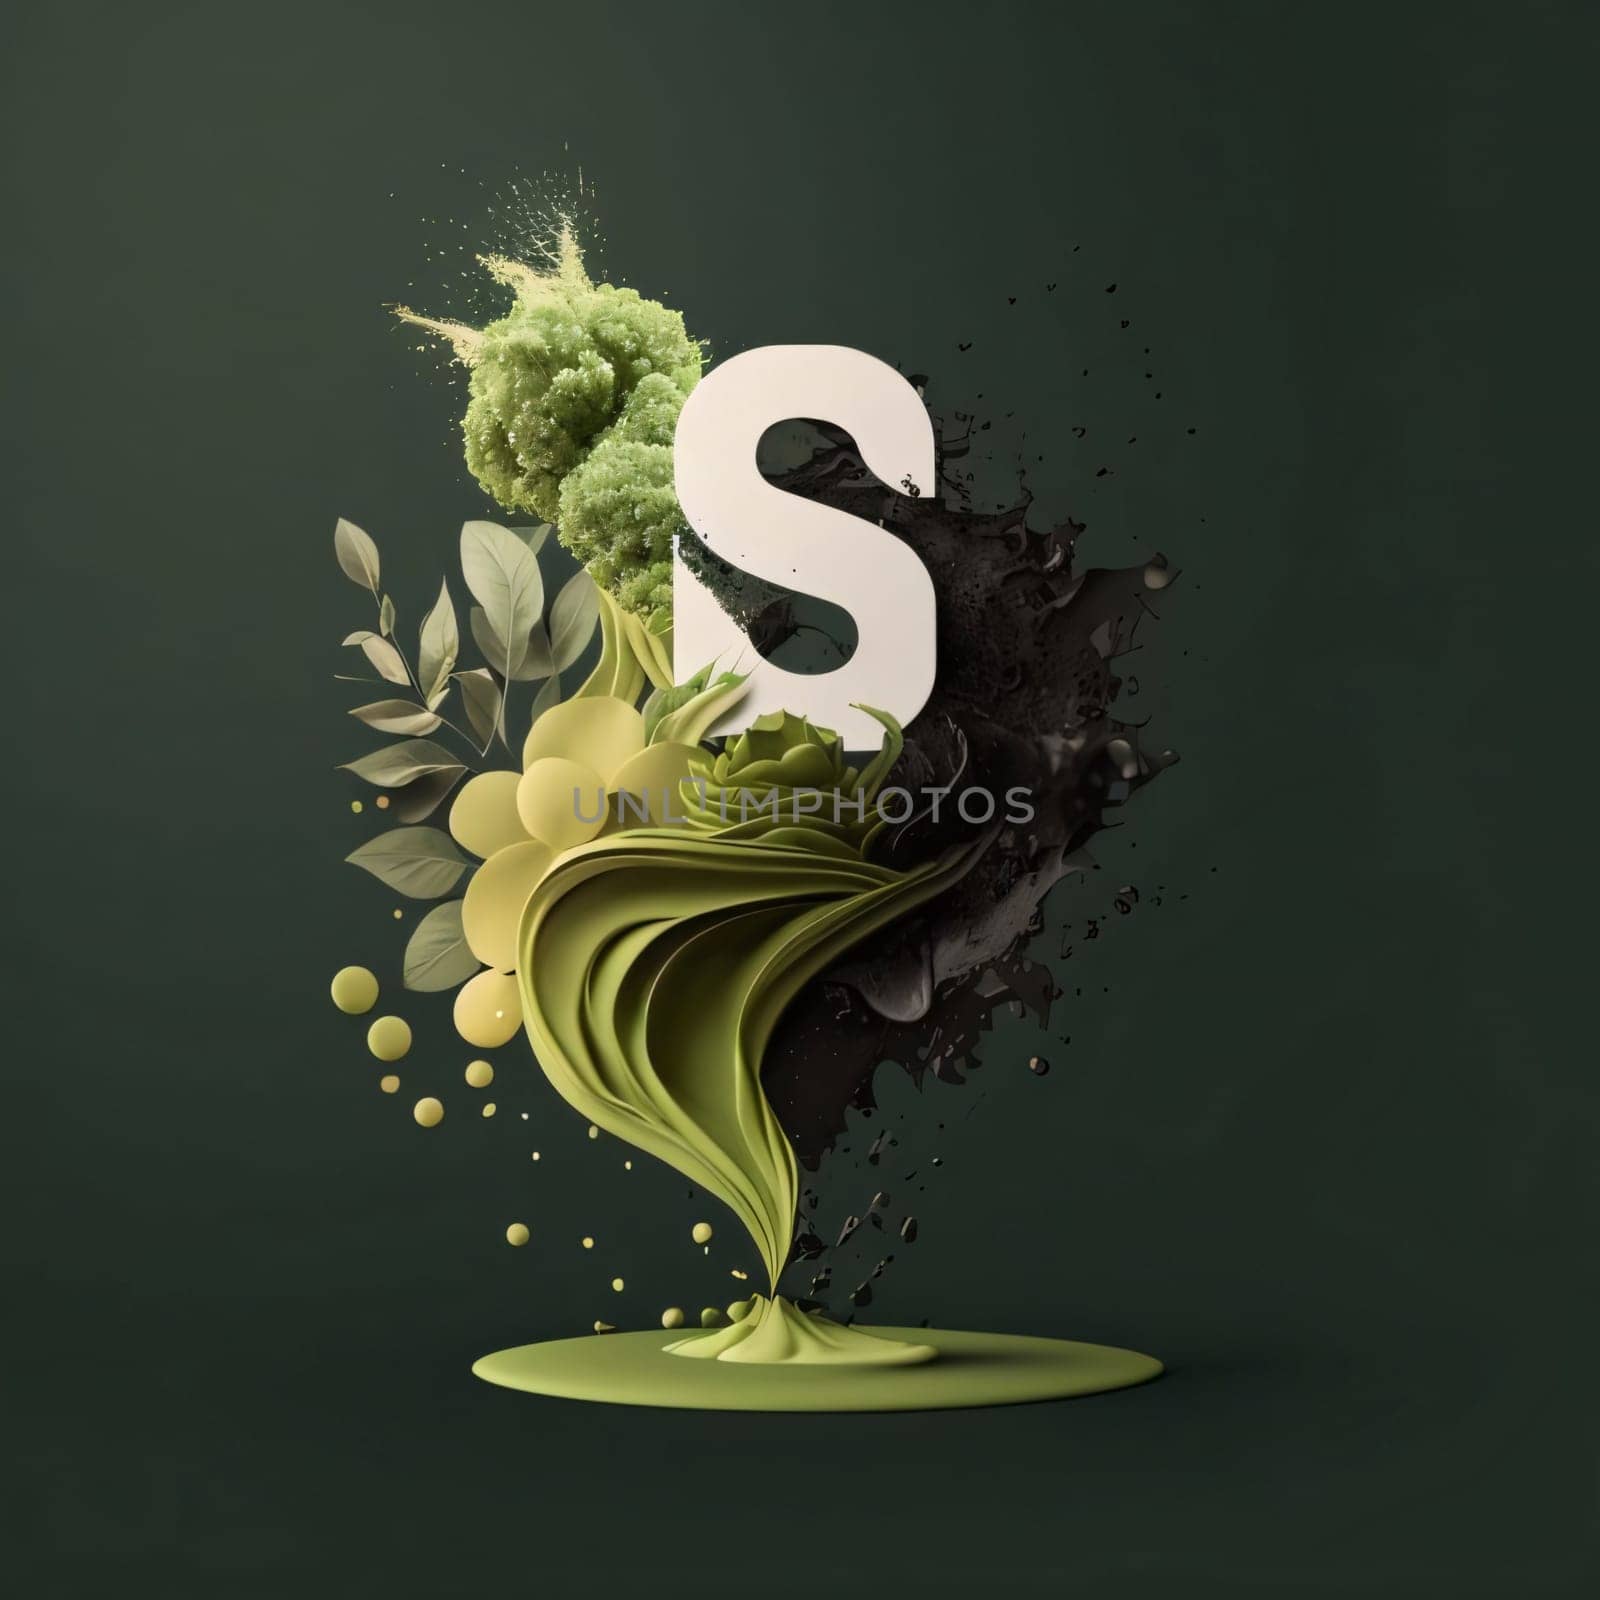 Graphic alphabet letters: Letter S made of green and black splashes with flowers and leaves